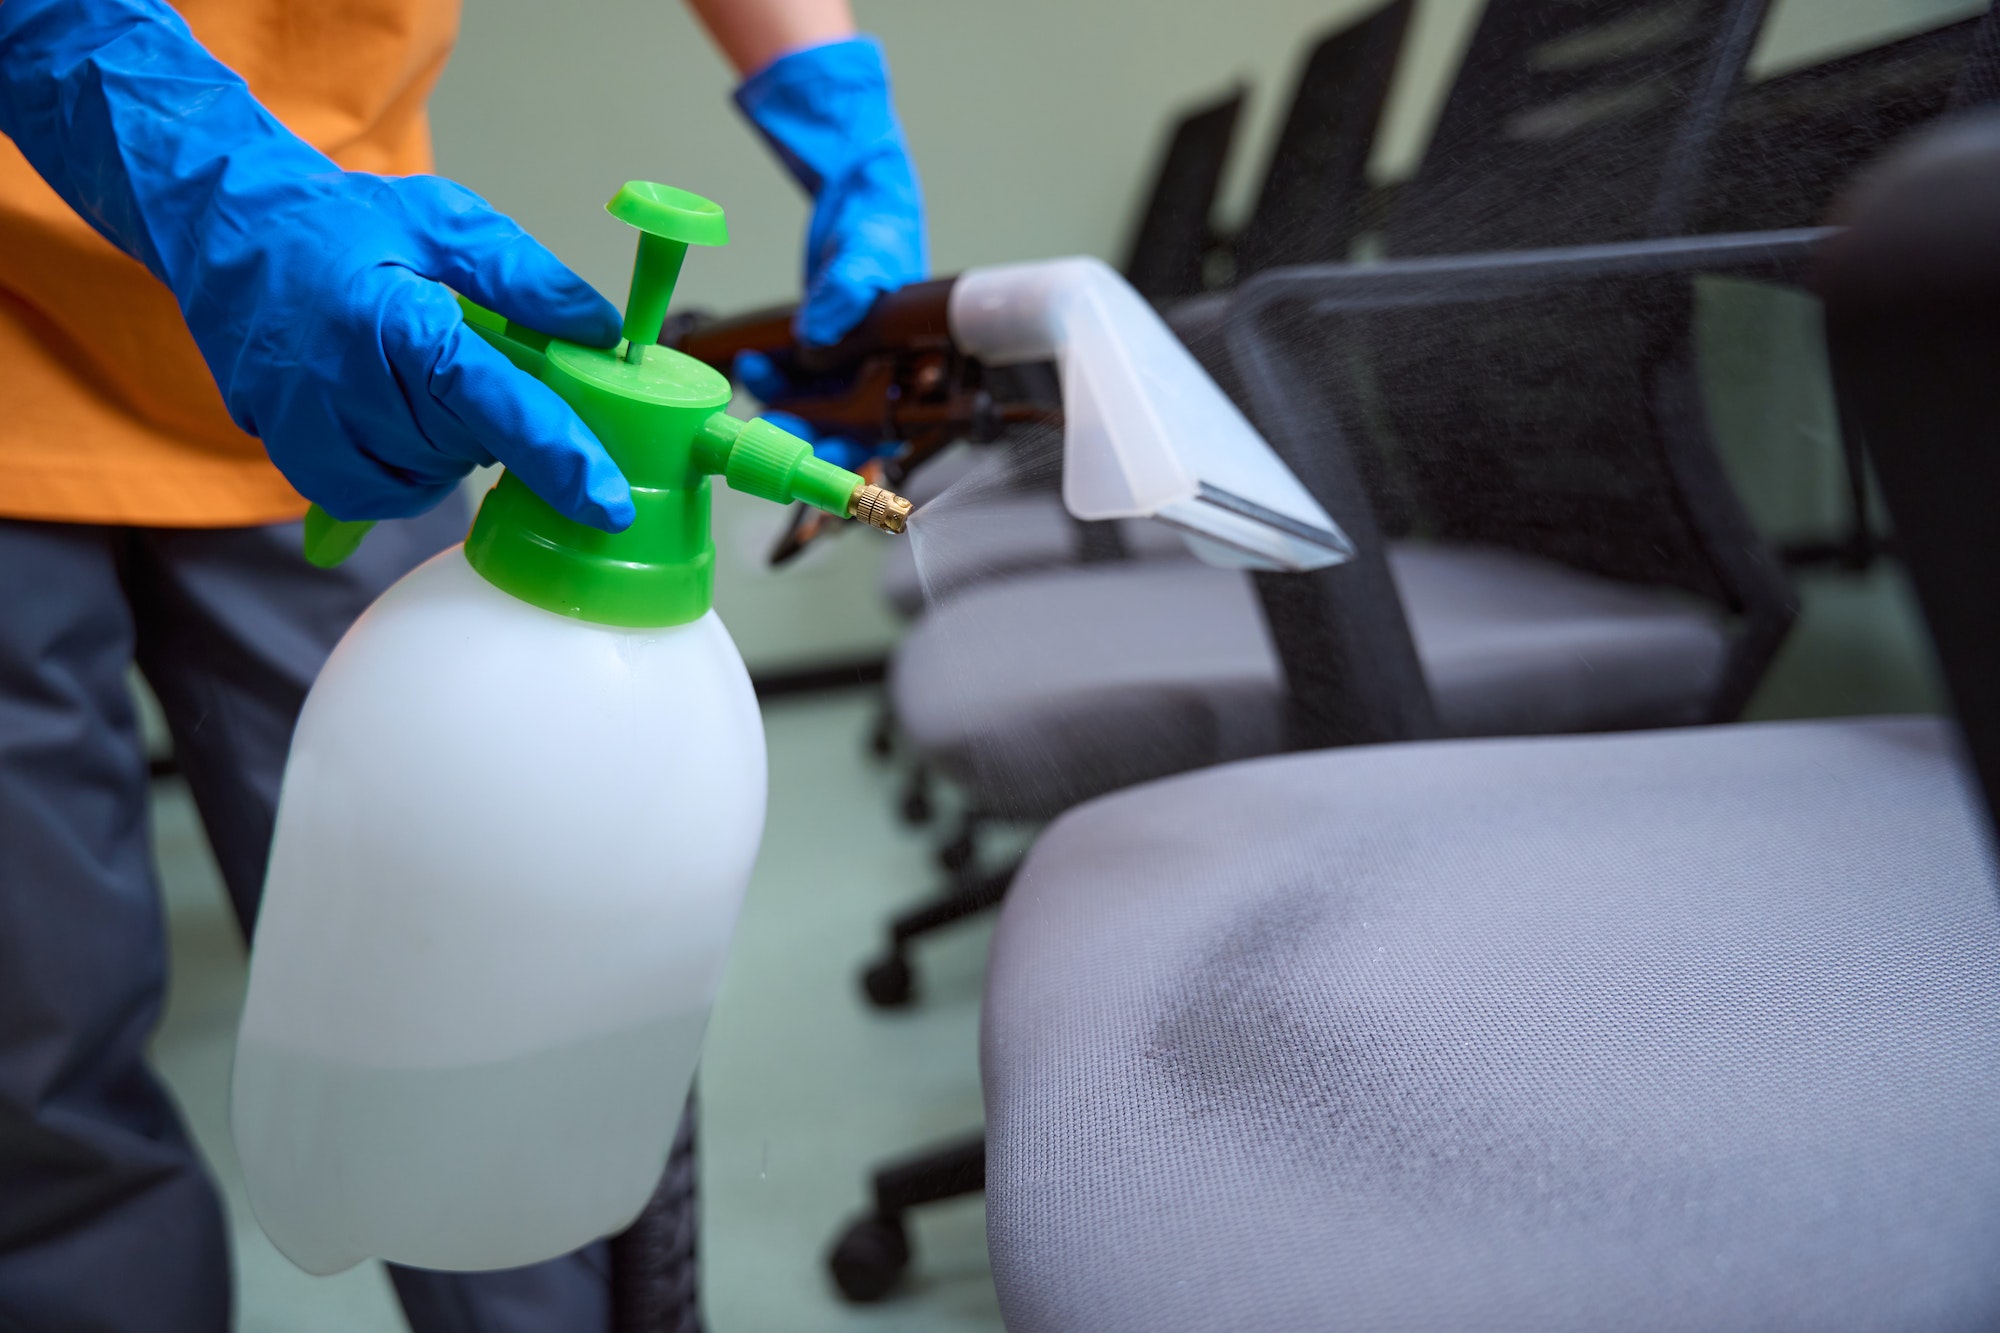 Hard-working cleaner using chemicals to disinfect the chairs